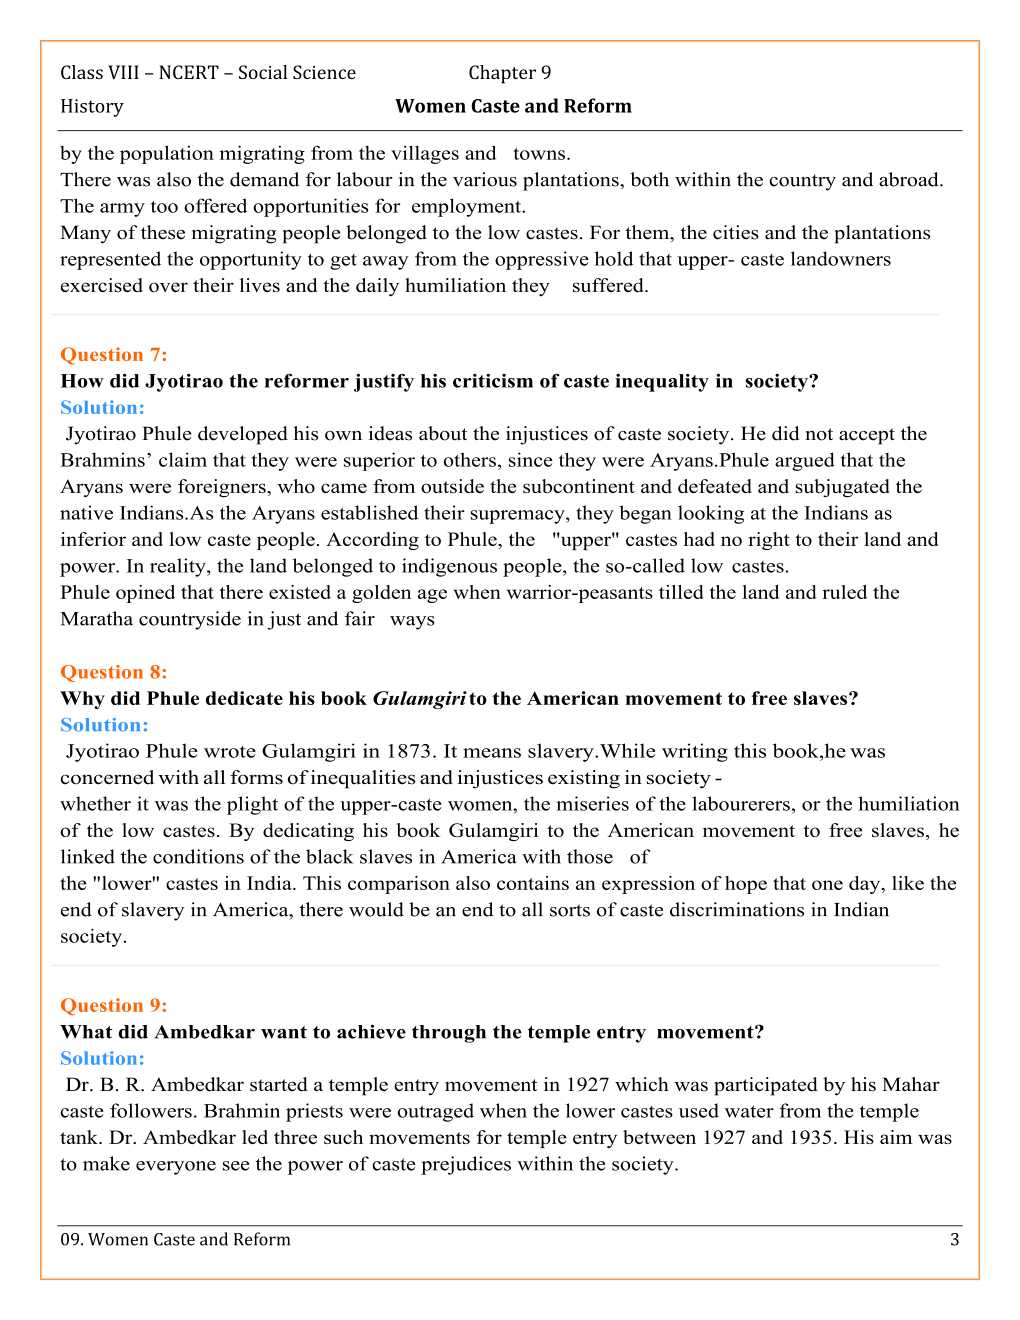 NCERT Solutions For Class 8 Social Science Our Pasts 3 Chapter 9